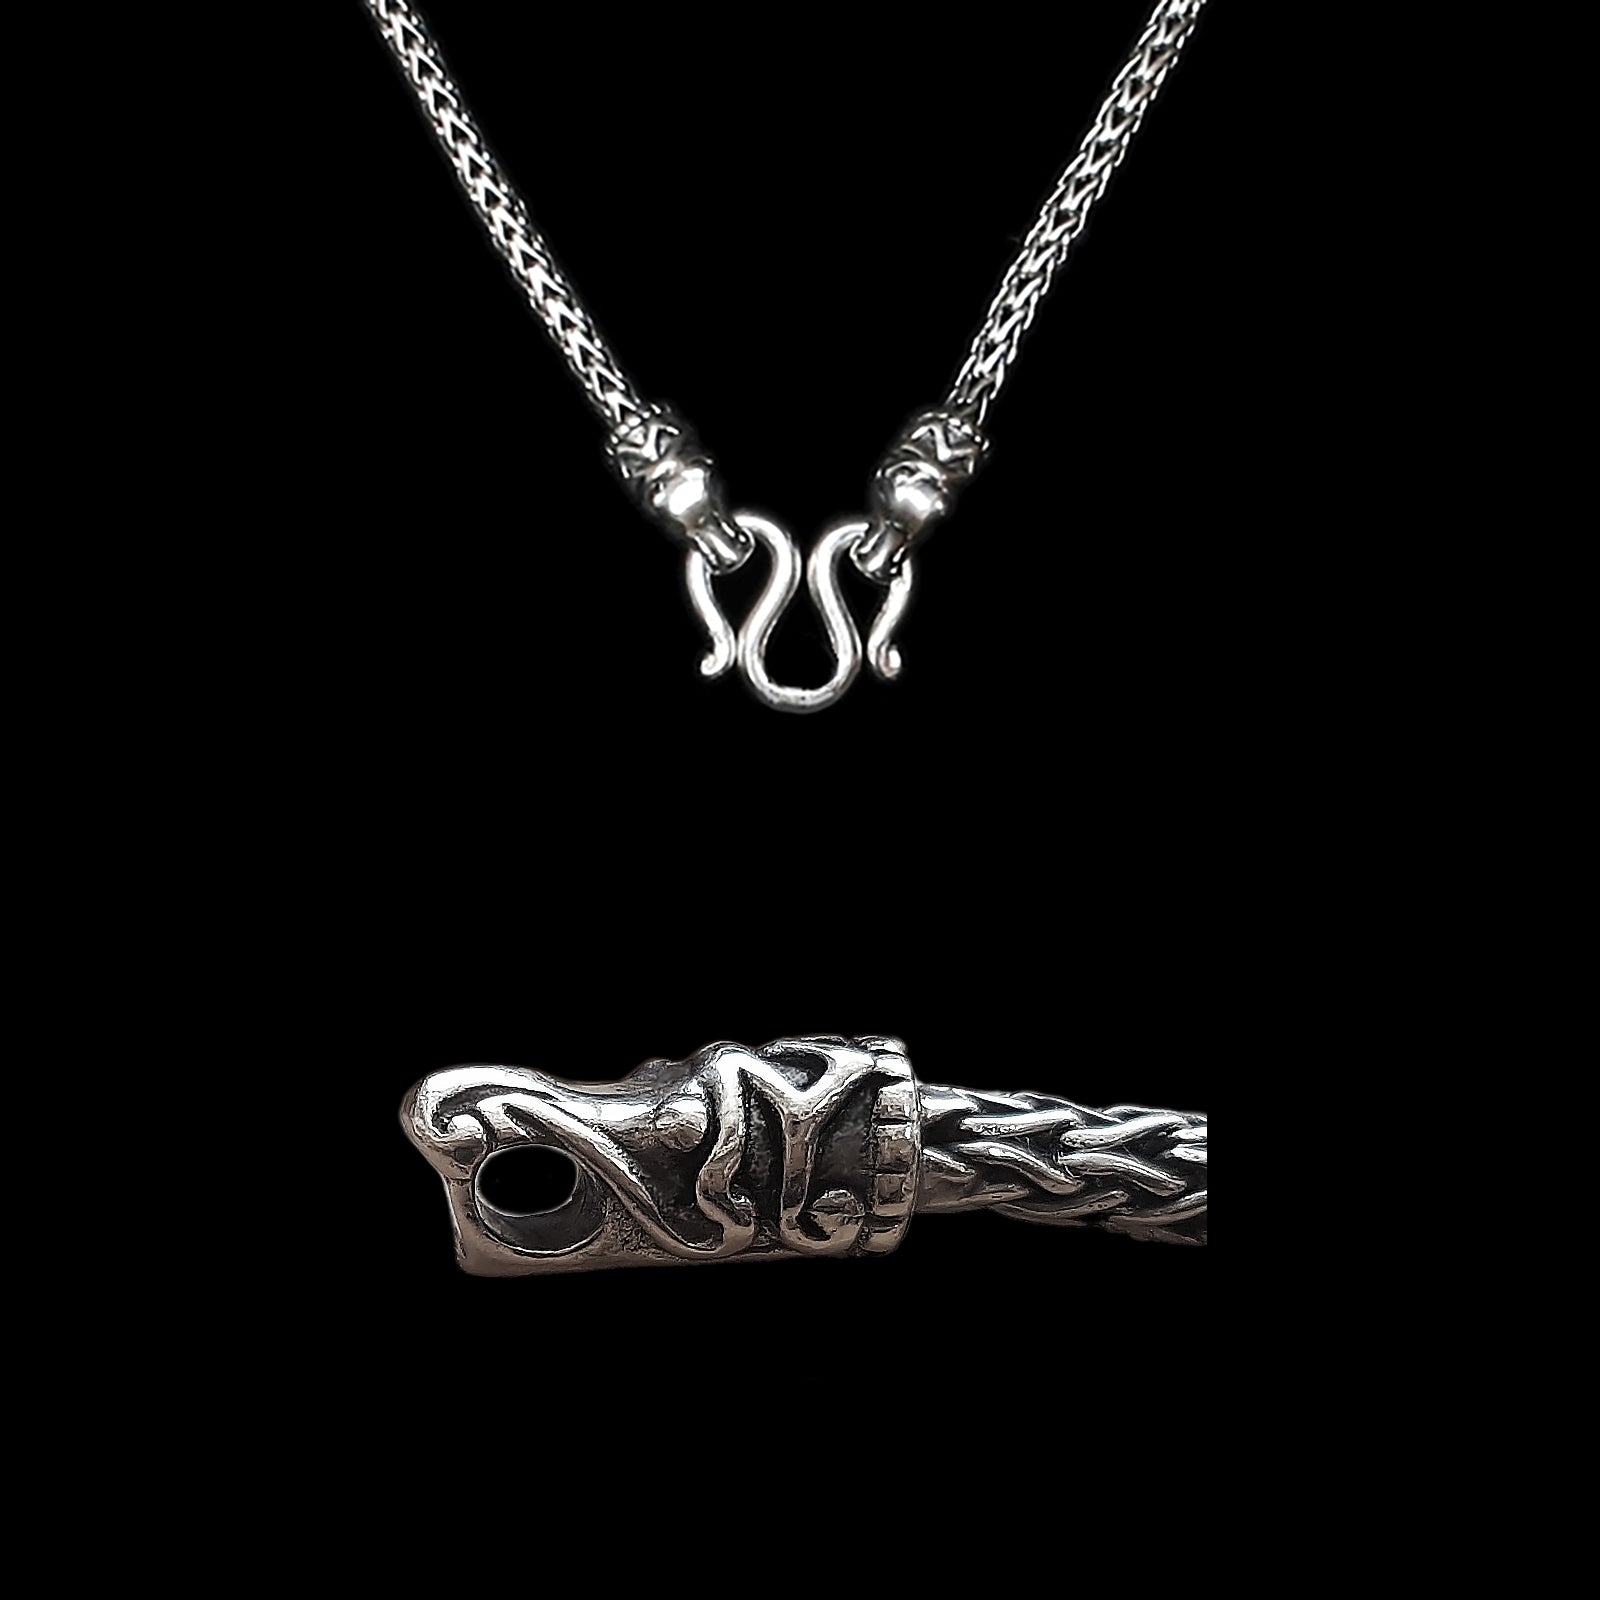 Sterling Silver Viking Snake Chain Necklace with Gotlandic Dragon Heads & Butterfly Clasp